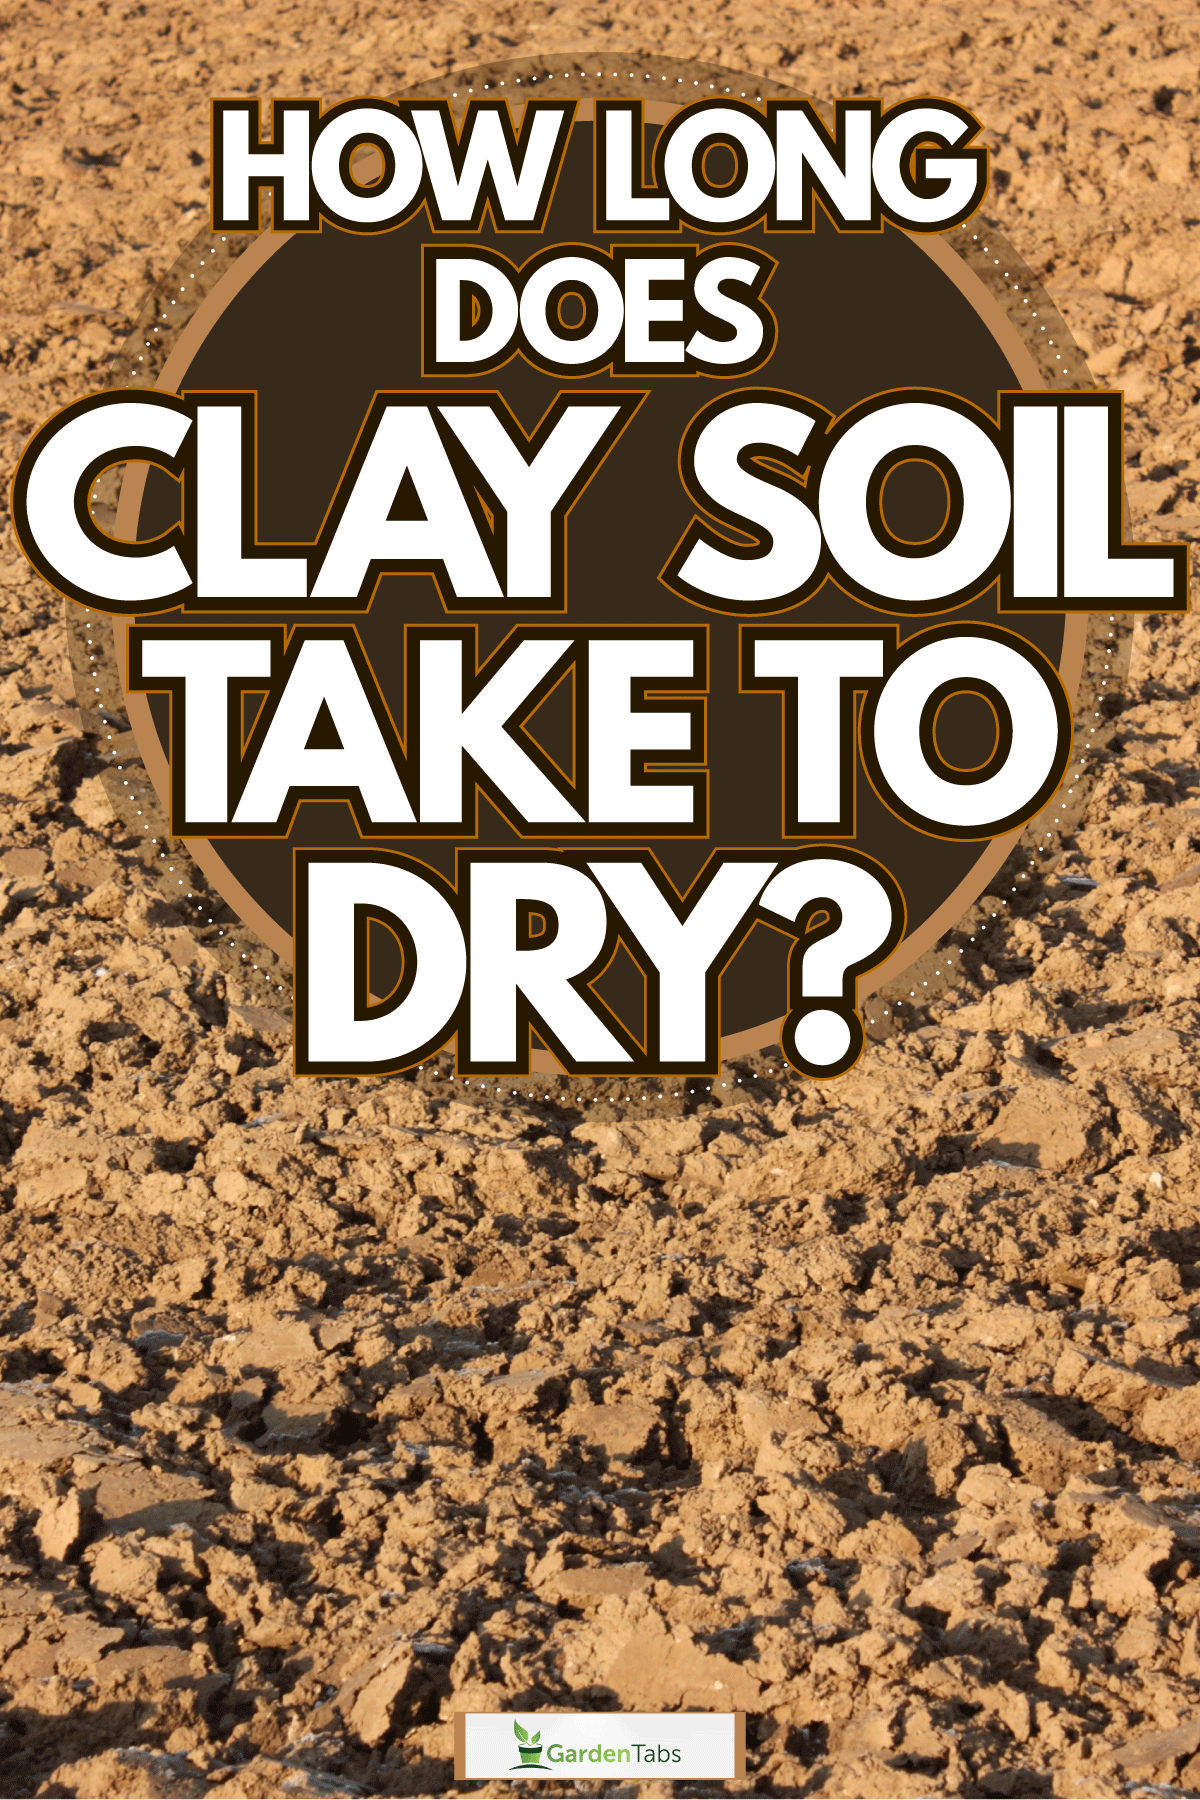 Newly plowed clay soil at a huge farm, How Long Does Clay Soil Take To Dry?